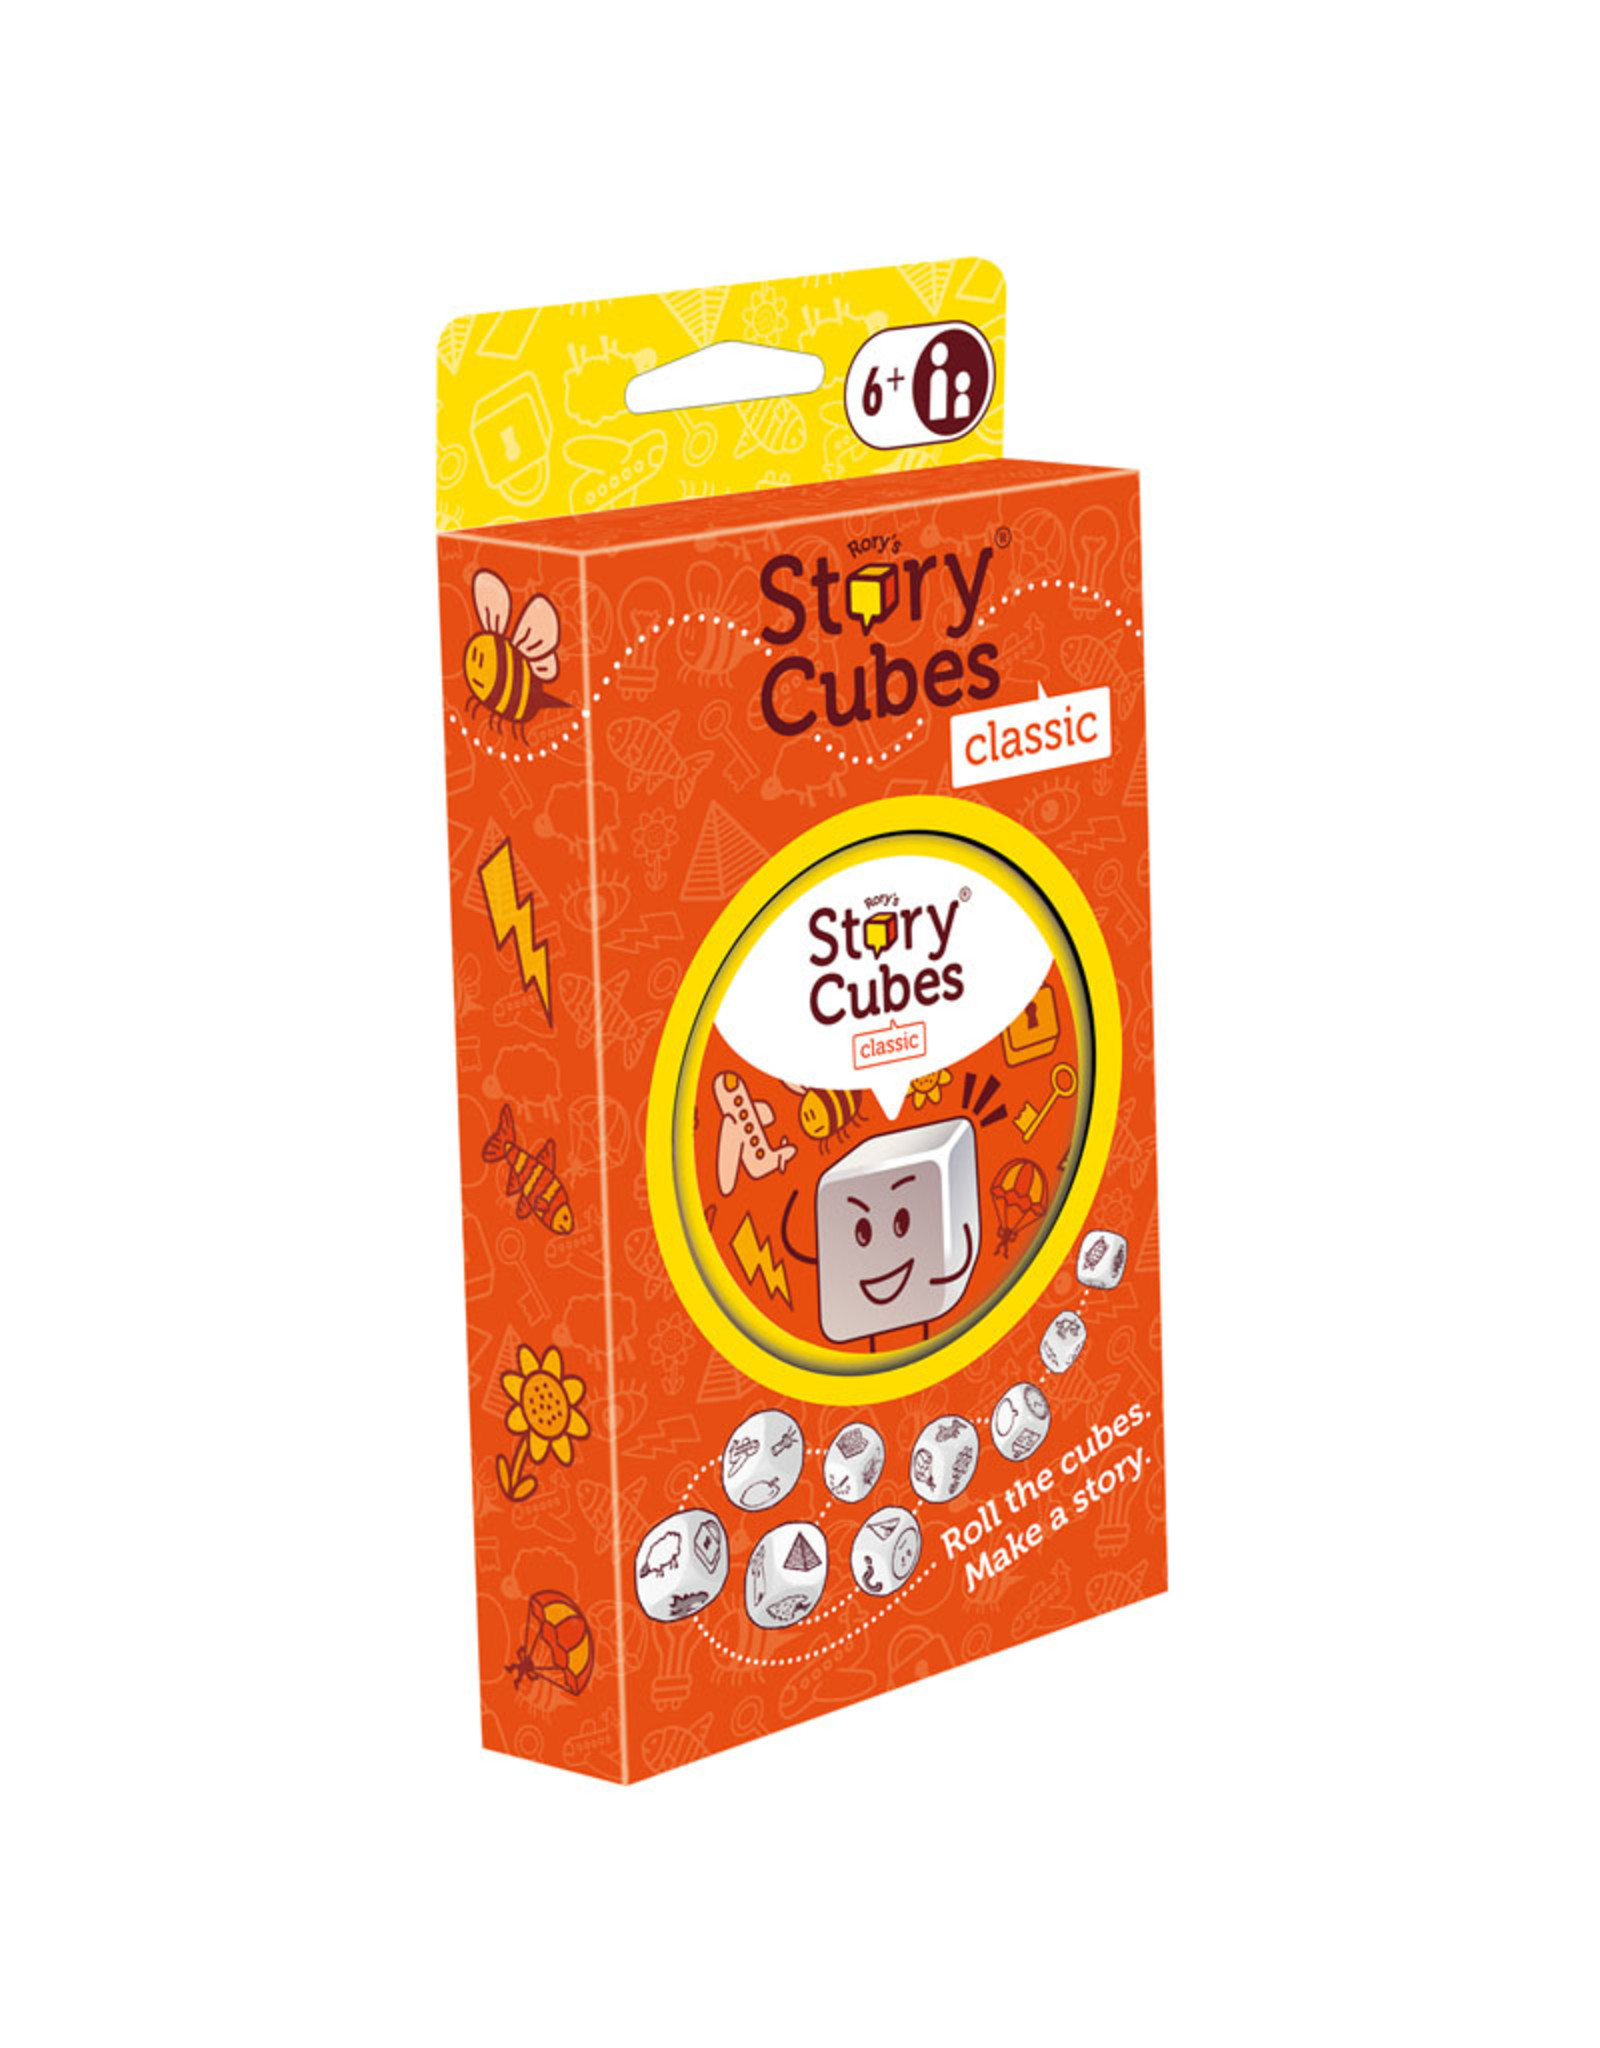 Rorys Story Cubes - Round Tin